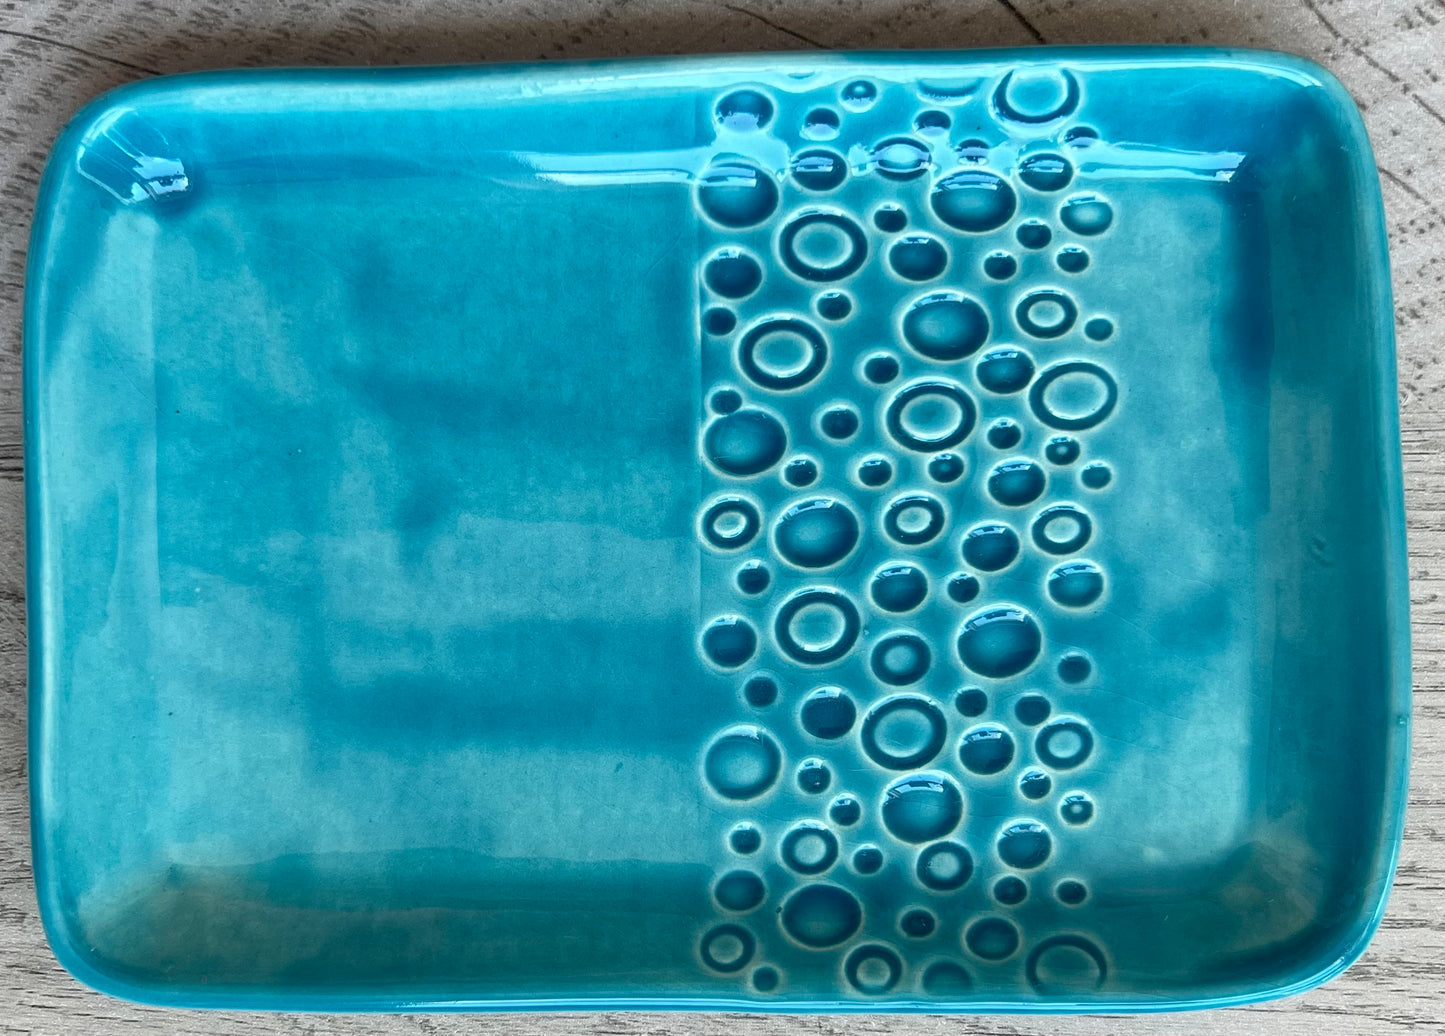 Artisan-Crafted Ceramic Bubble Tray, L, Turquoise - w/Card Personally Autographed to YOU by Mark